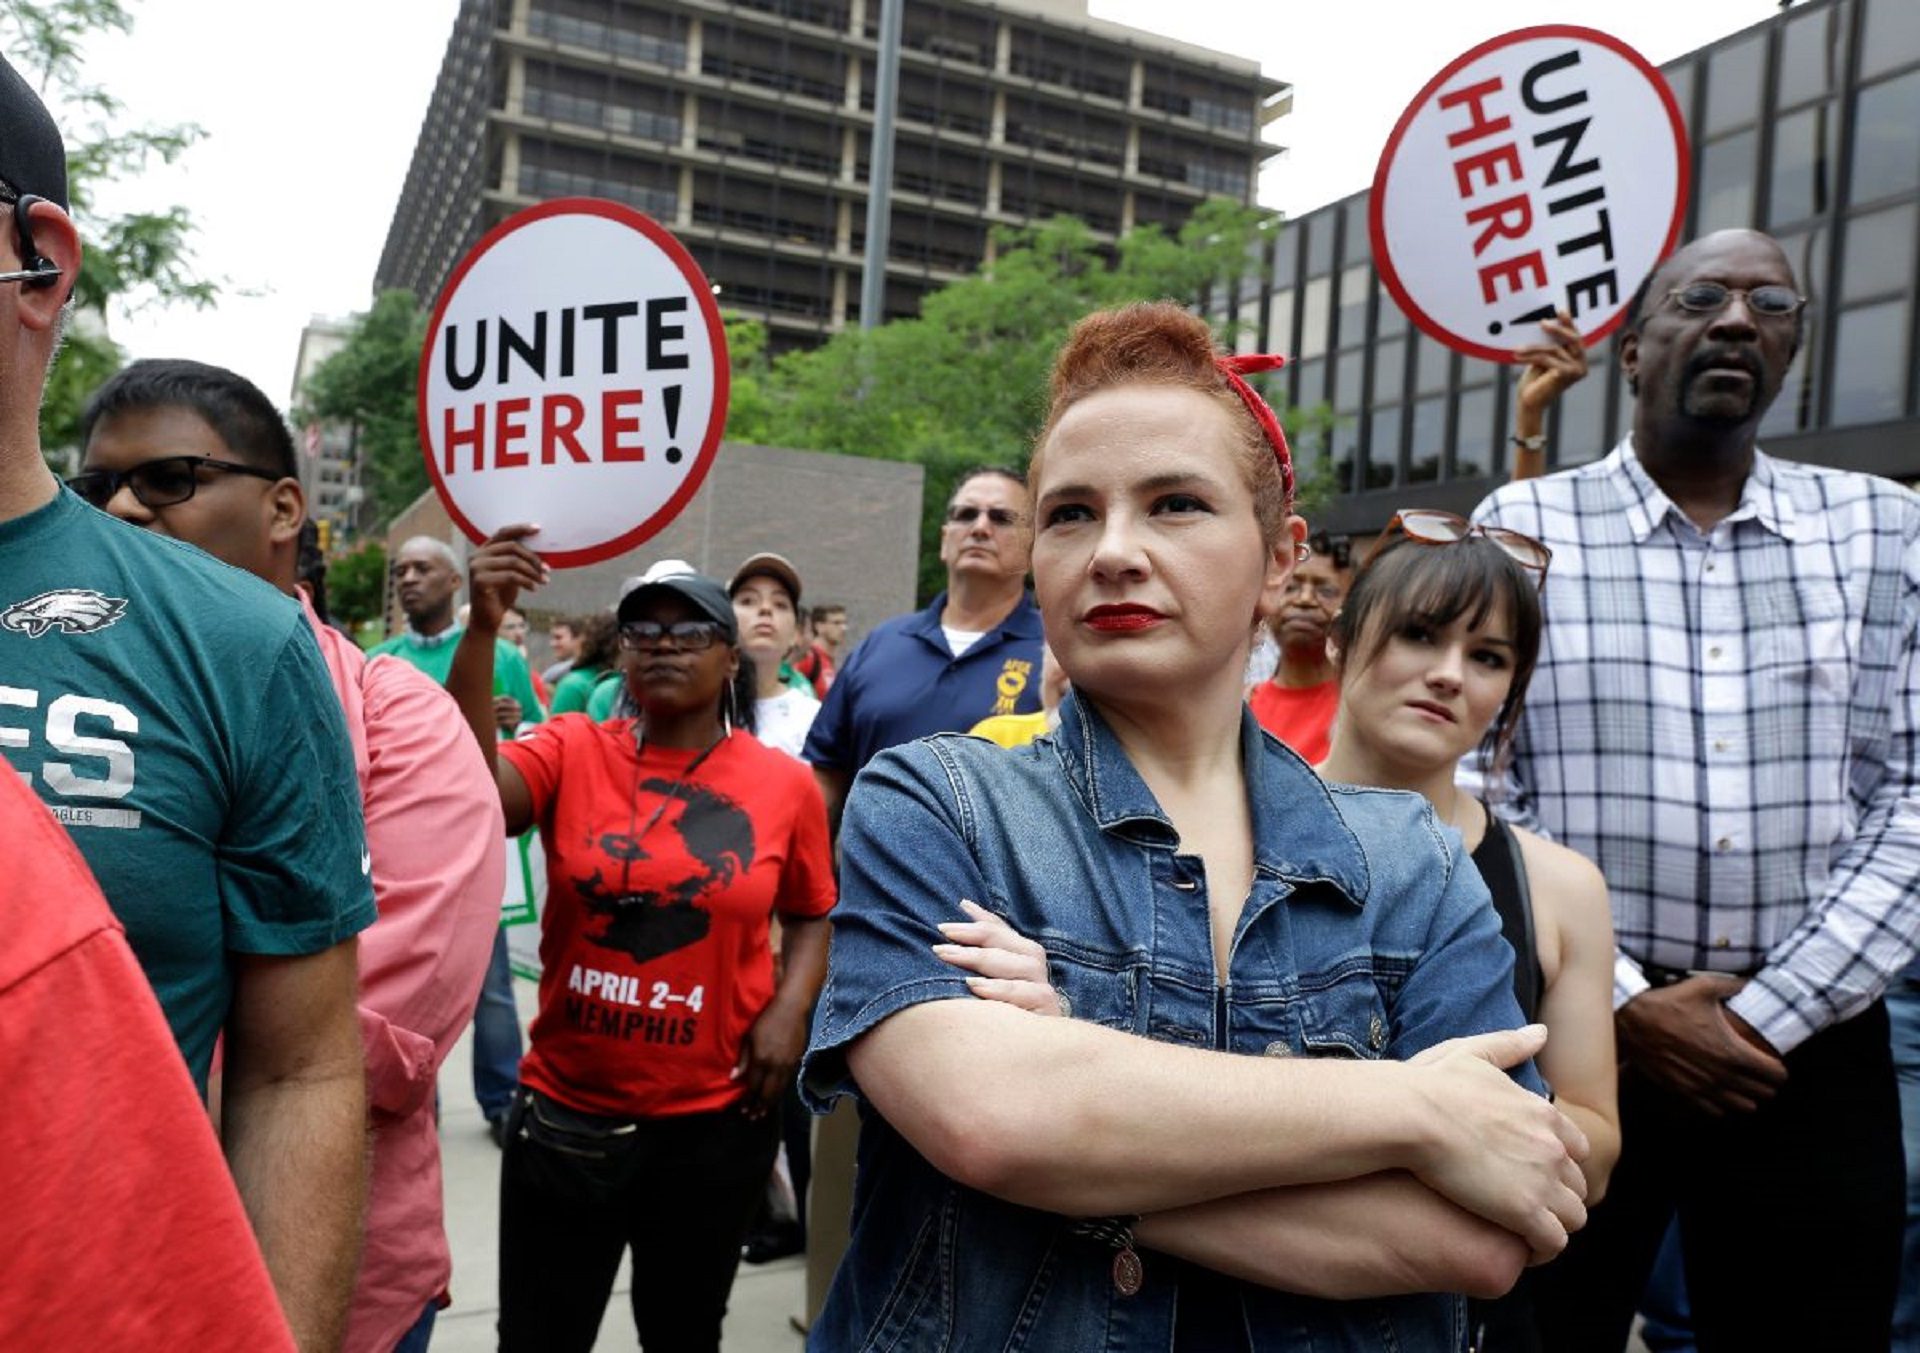 In this June 27, 2018, file photo, Amanda Hammock, center, a Delaware County, Pa. Democratic Party activist, is dressed as Rosie the Riveter during a protest organized by the Philadelphia Council AFL-CIO. The protesters denounced a U.S. Supreme Court ruling that government workers can't be forced to contribute to labor unions that represent them in collective bargaining.